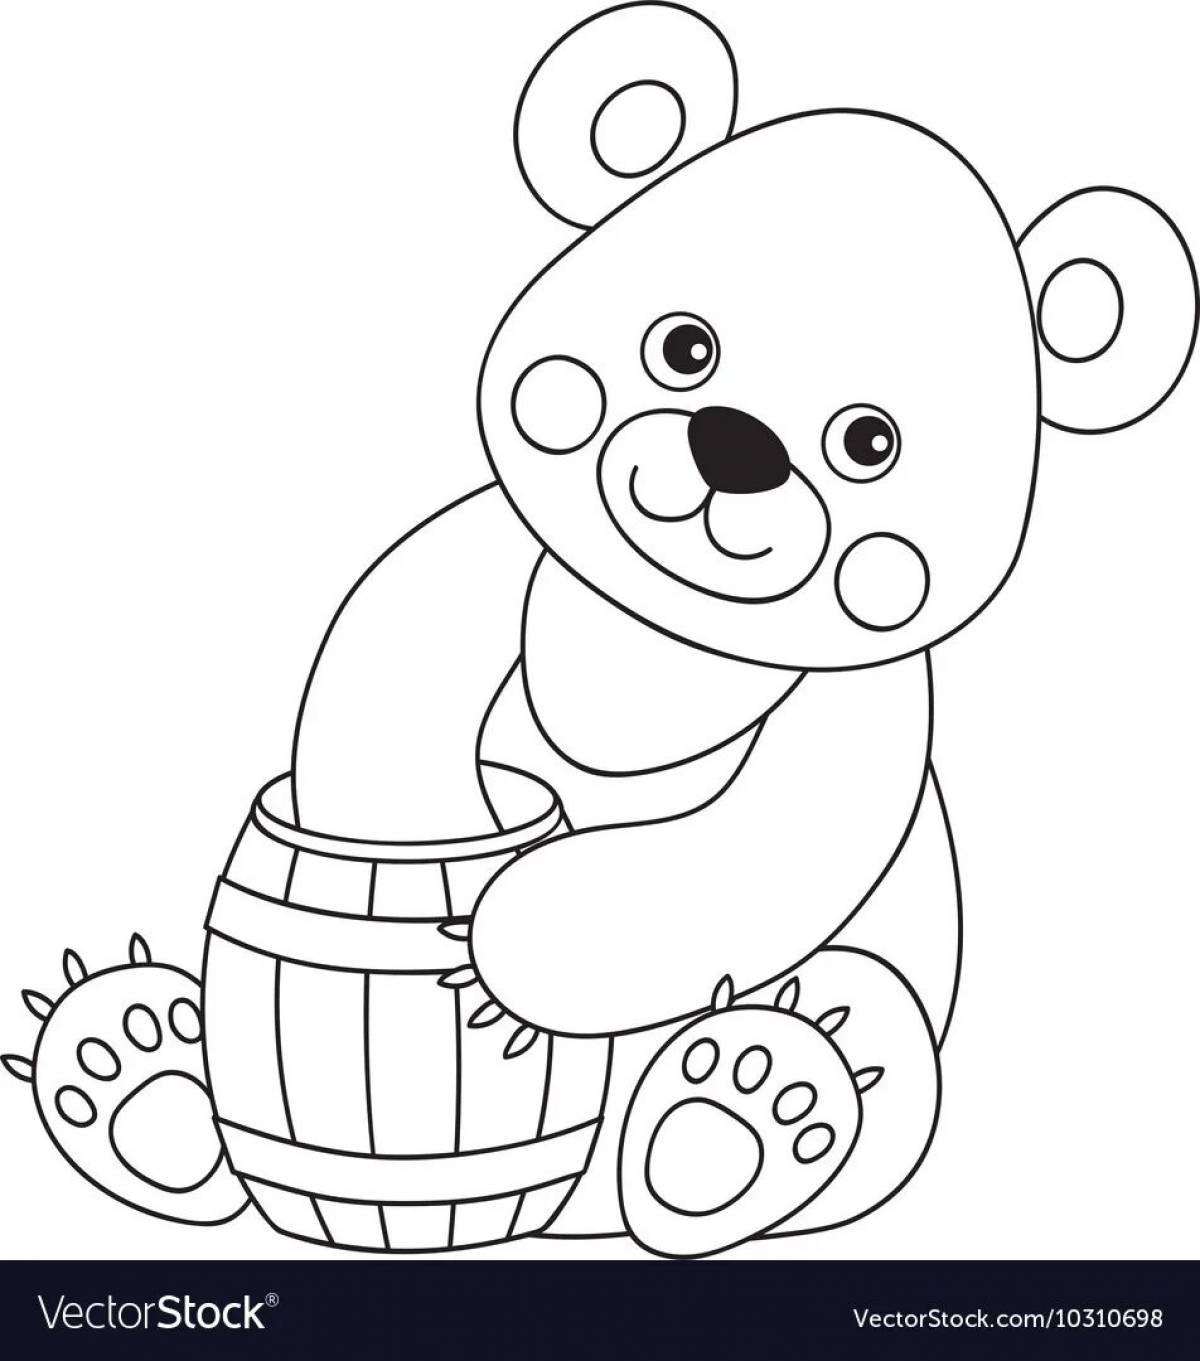 Merry bear with honey coloring book